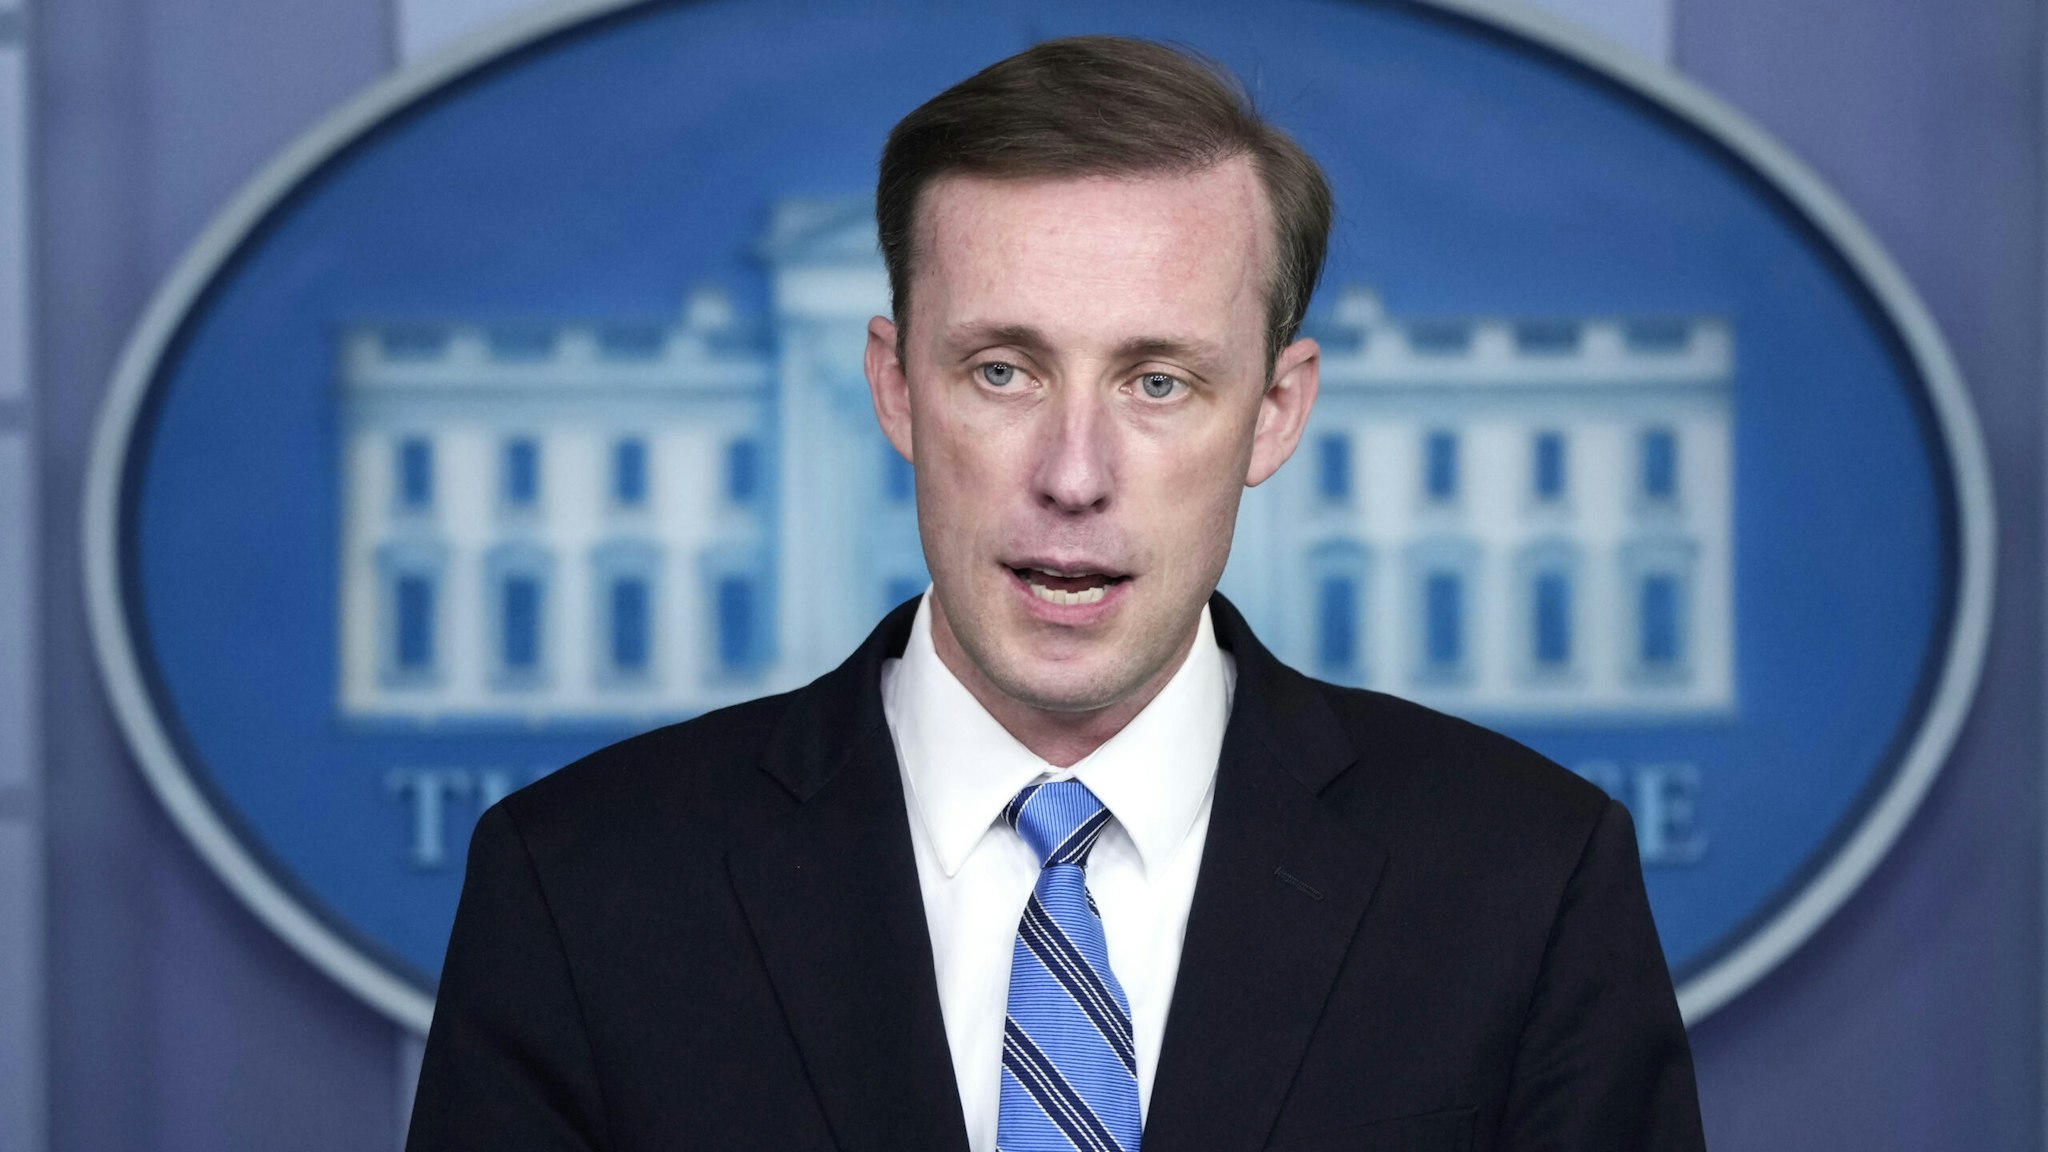 WASHINGTON, DC - AUGUST 23: White House National Security Advisor Jake Sullivan speaks during the daily press briefing at the White House on August 23, 2021 in Washington, DC. Sullivan took questions about the situation in Afghanistan.